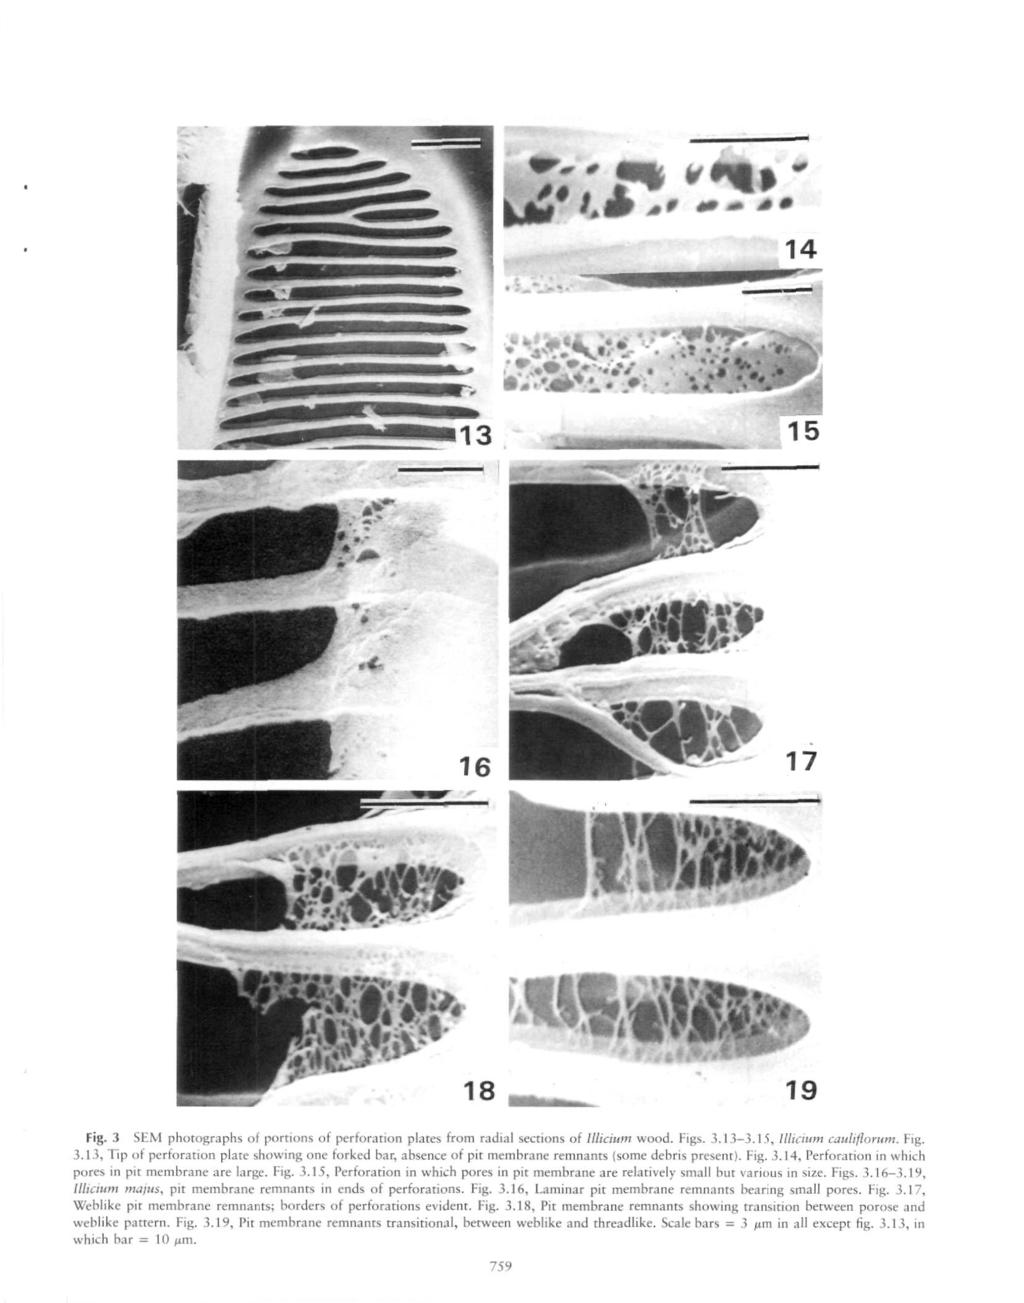 M?,.**.*-??. ->r.'v.'r '.T.fSafc Fig. 3 SEM photographs of portions of perforation plates from radial sections of Illicium wood. Figs. 3.13 3.15, llliciiim cauliflorum. Fig. 3.13, Tip of perforation plate showing one forked bar, absence of pit membrane remnants (some debris present).